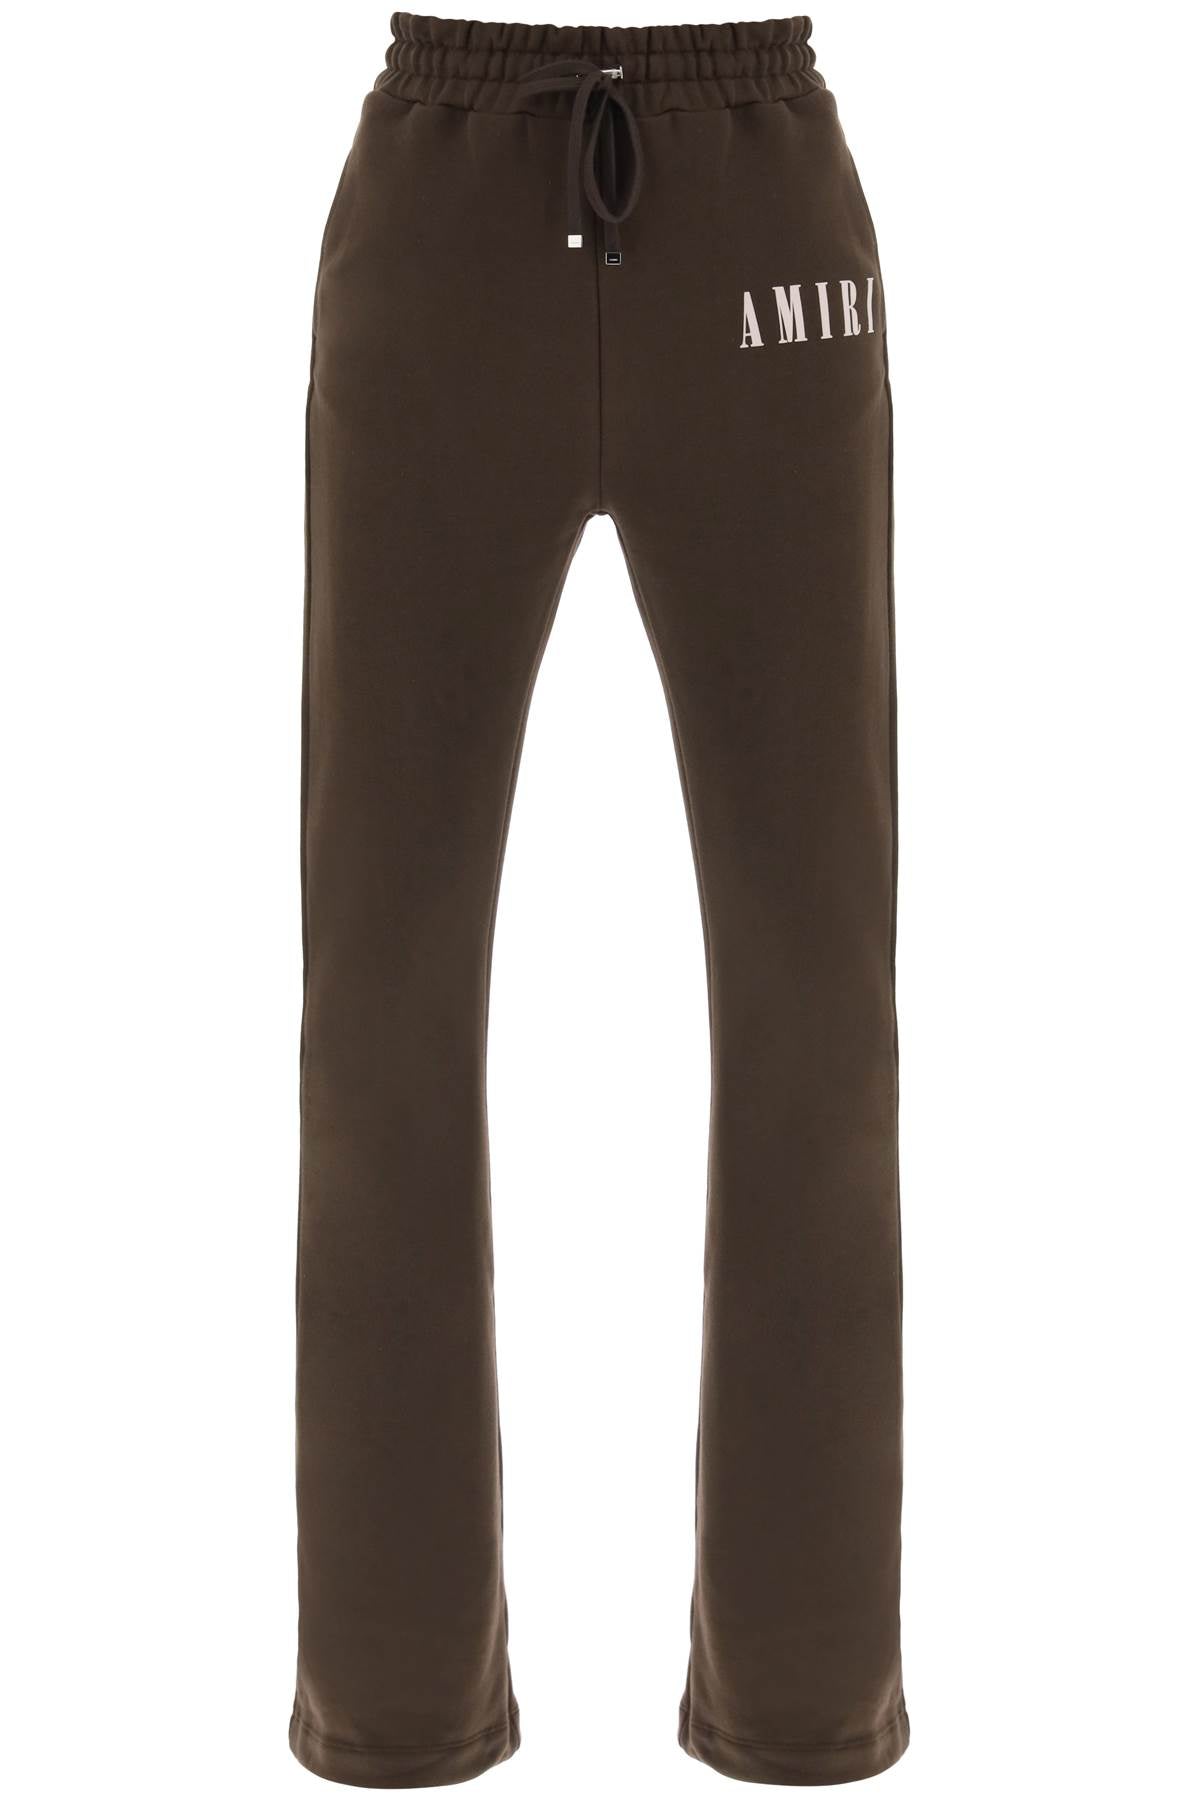 AMIRI Brown Joggers with Core Logo for Women - SS24